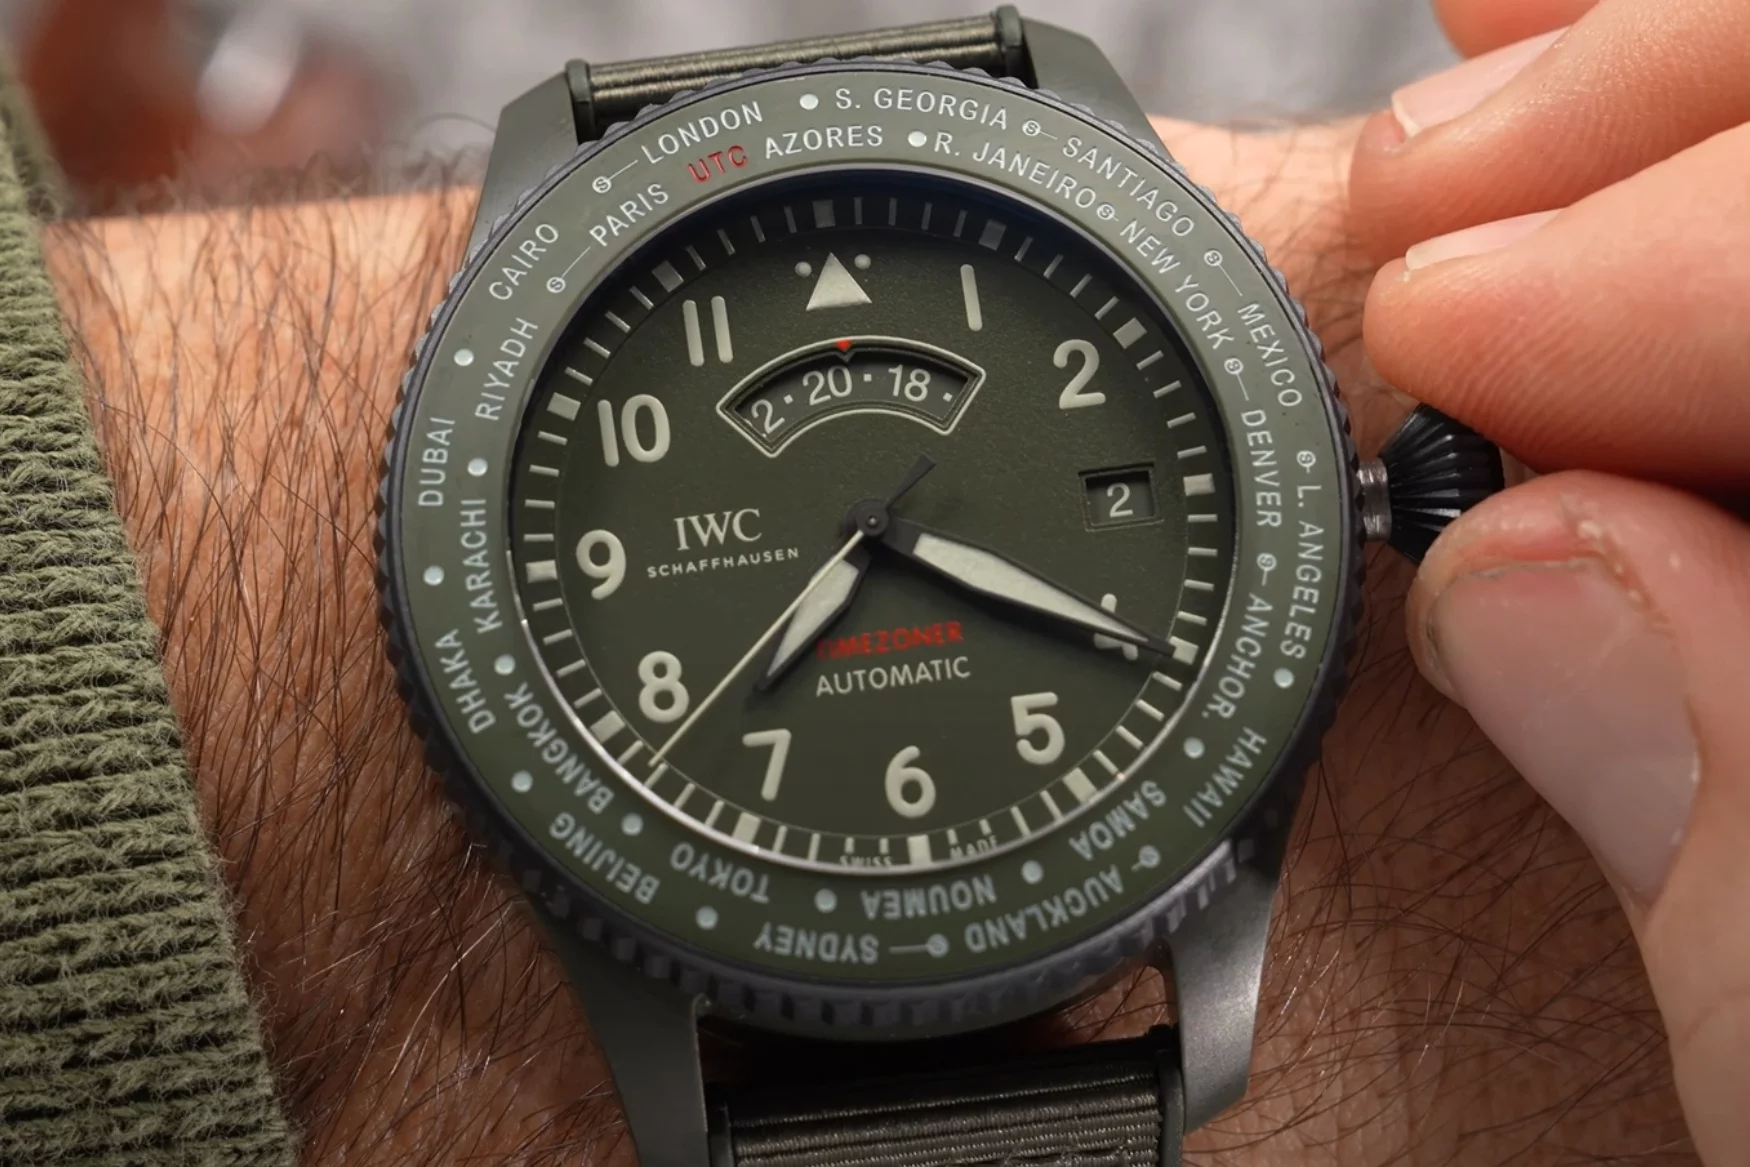 The UK Perfect Replica IWC Pilot’s Watch Timezoner TOP GUN Woodland adds tasteful colour to the brand’s most underrated complication